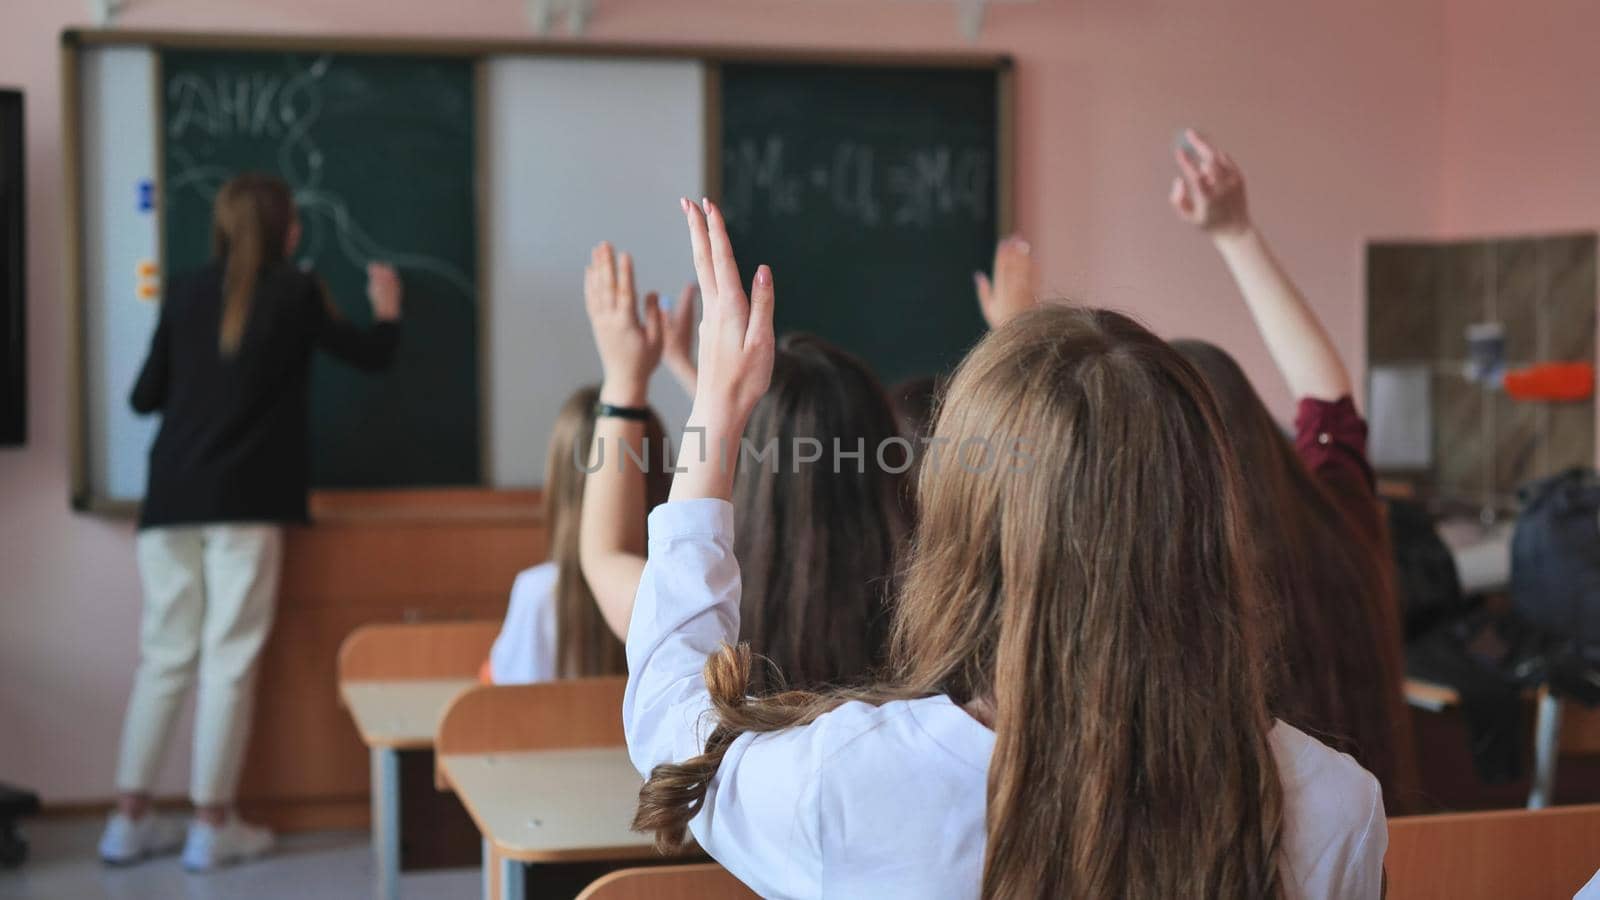 High school students stretch their hands in the lesson. Russian school